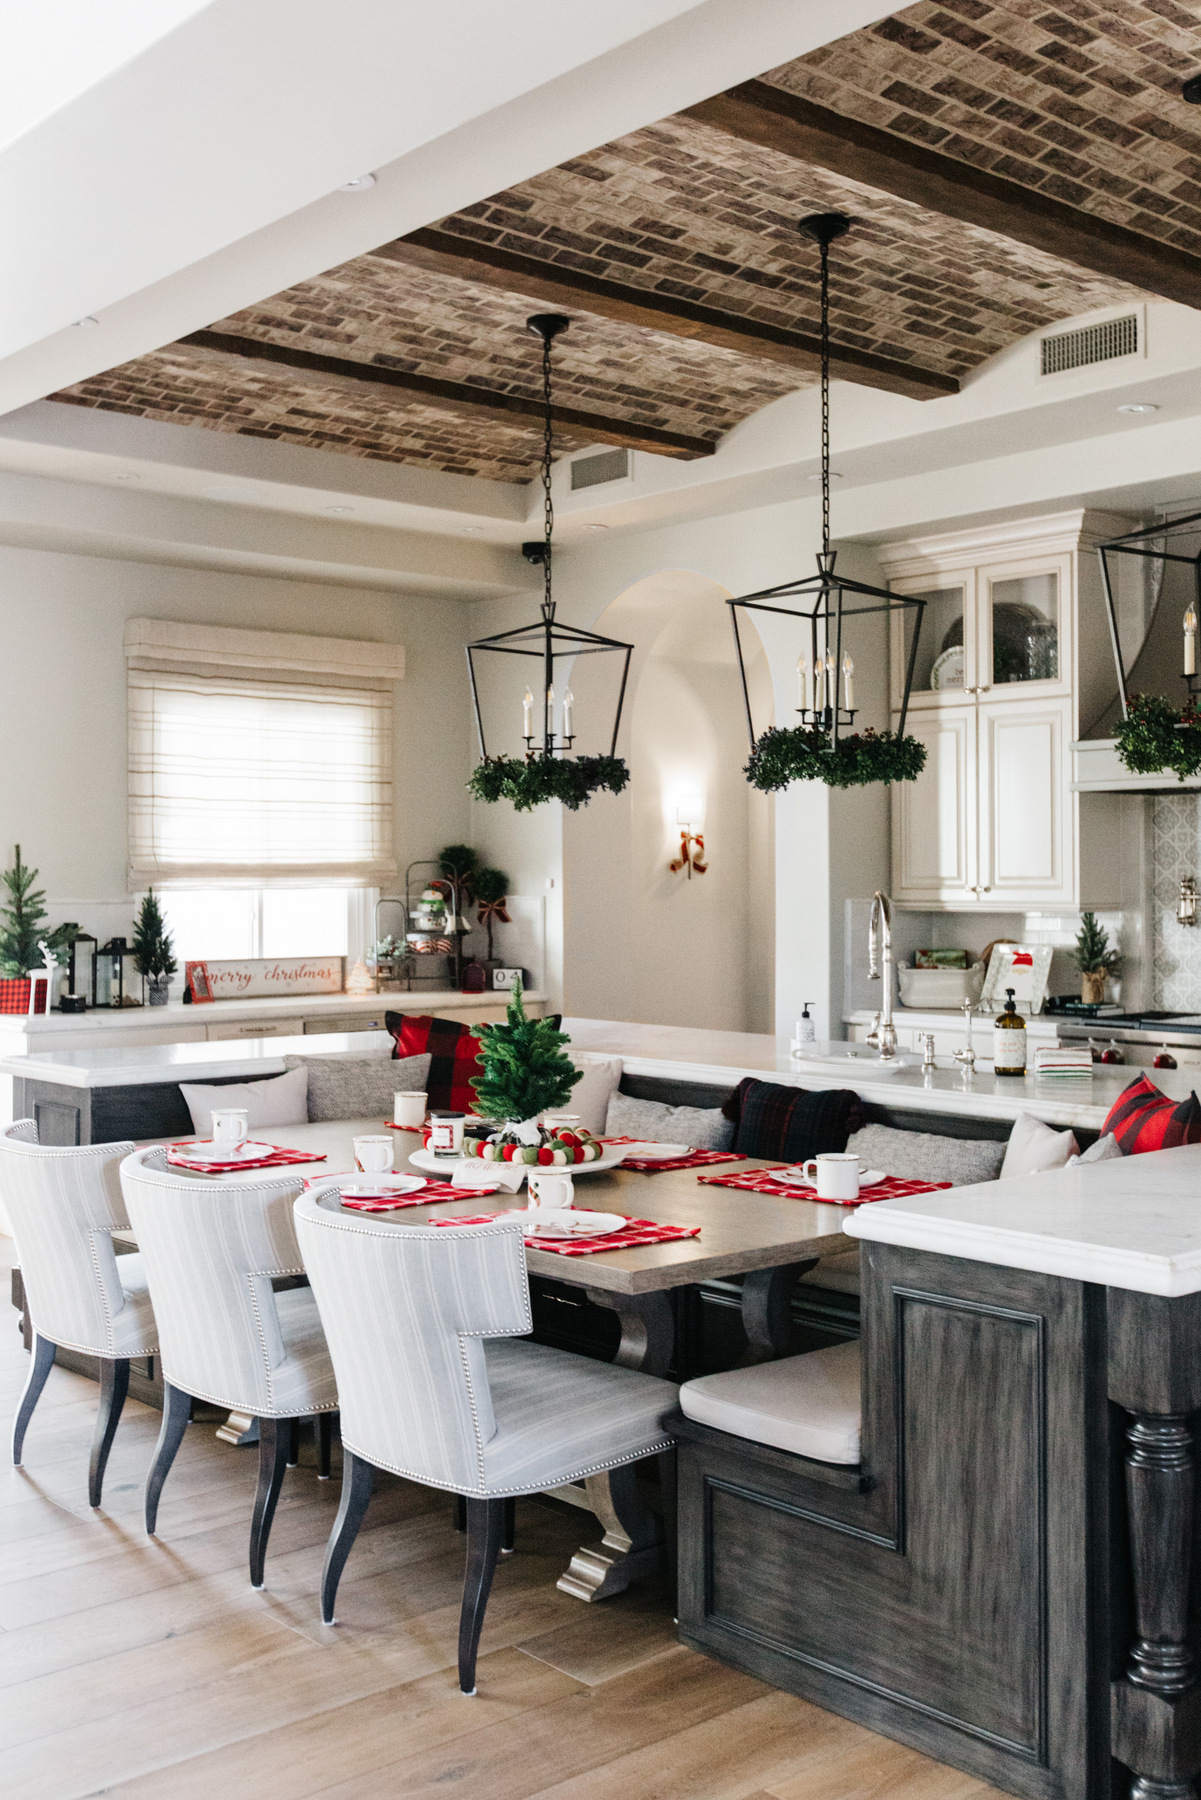 Gorgeous Kitchen Decorated for Christmas | The TomKat Studio